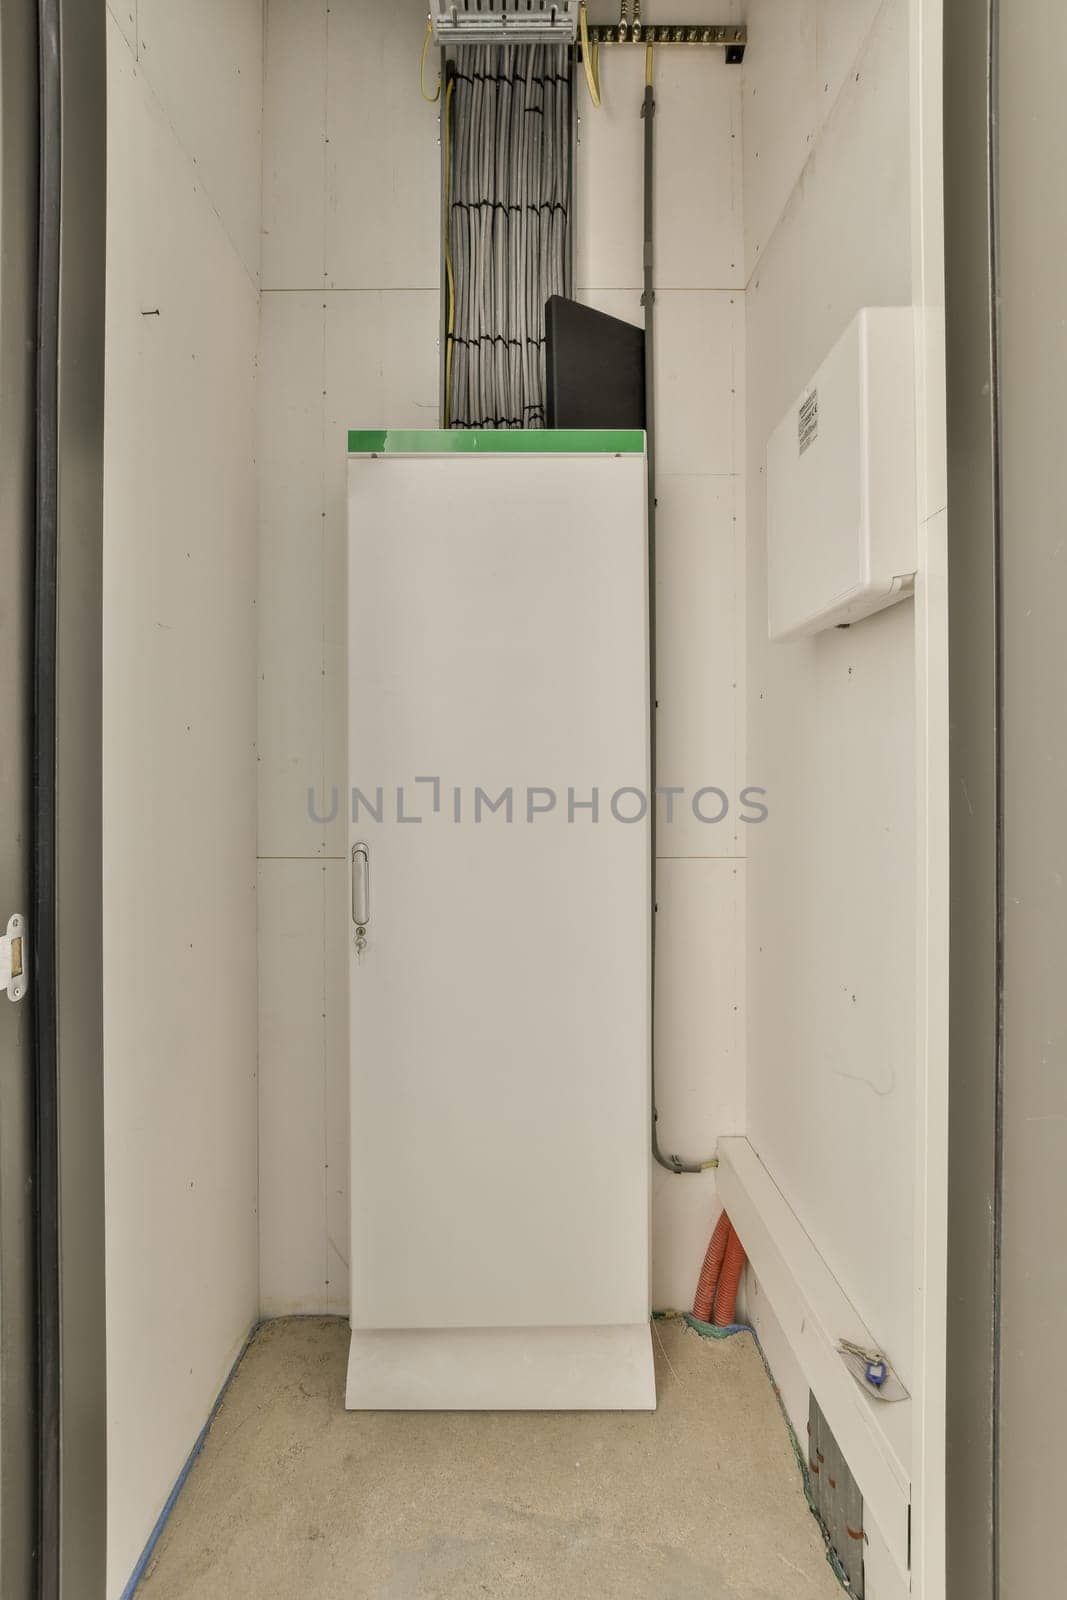 a white refrigerator freezer in the corner of a room that is being remodeled and ready to be used for storage